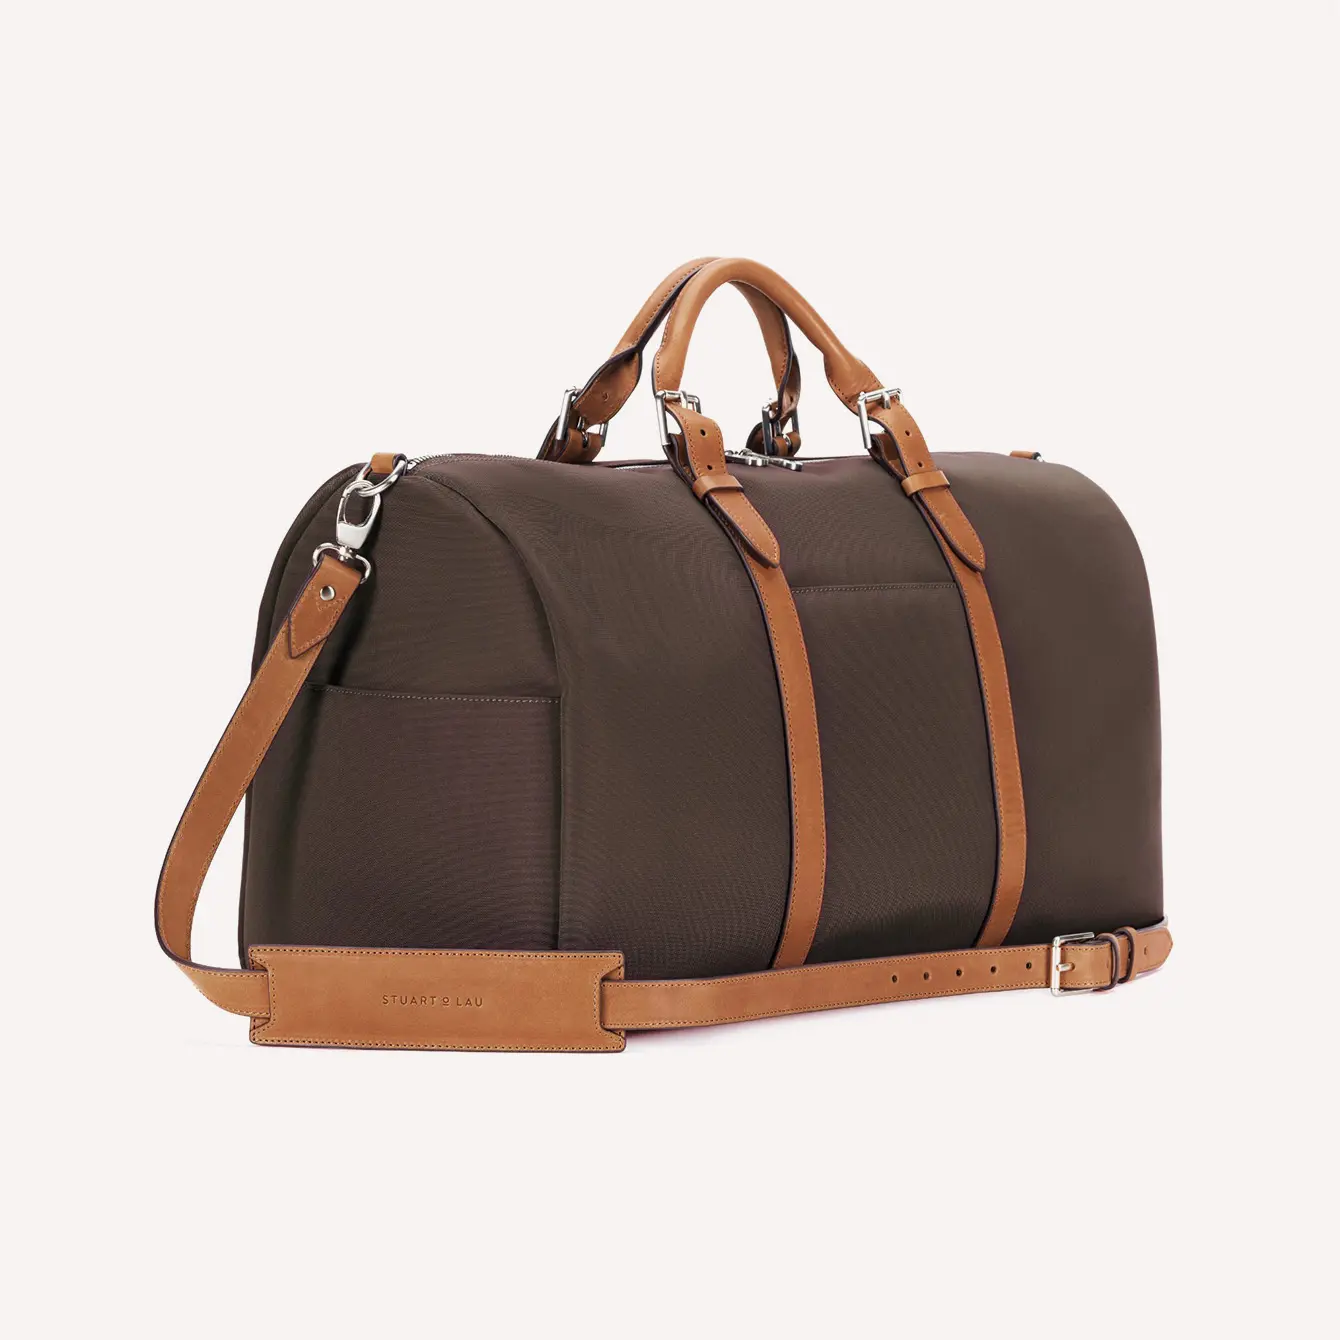 lightly advertise T Top 12 Best Men's Weekender Bags & Duffels for 2023 - The Modest Man